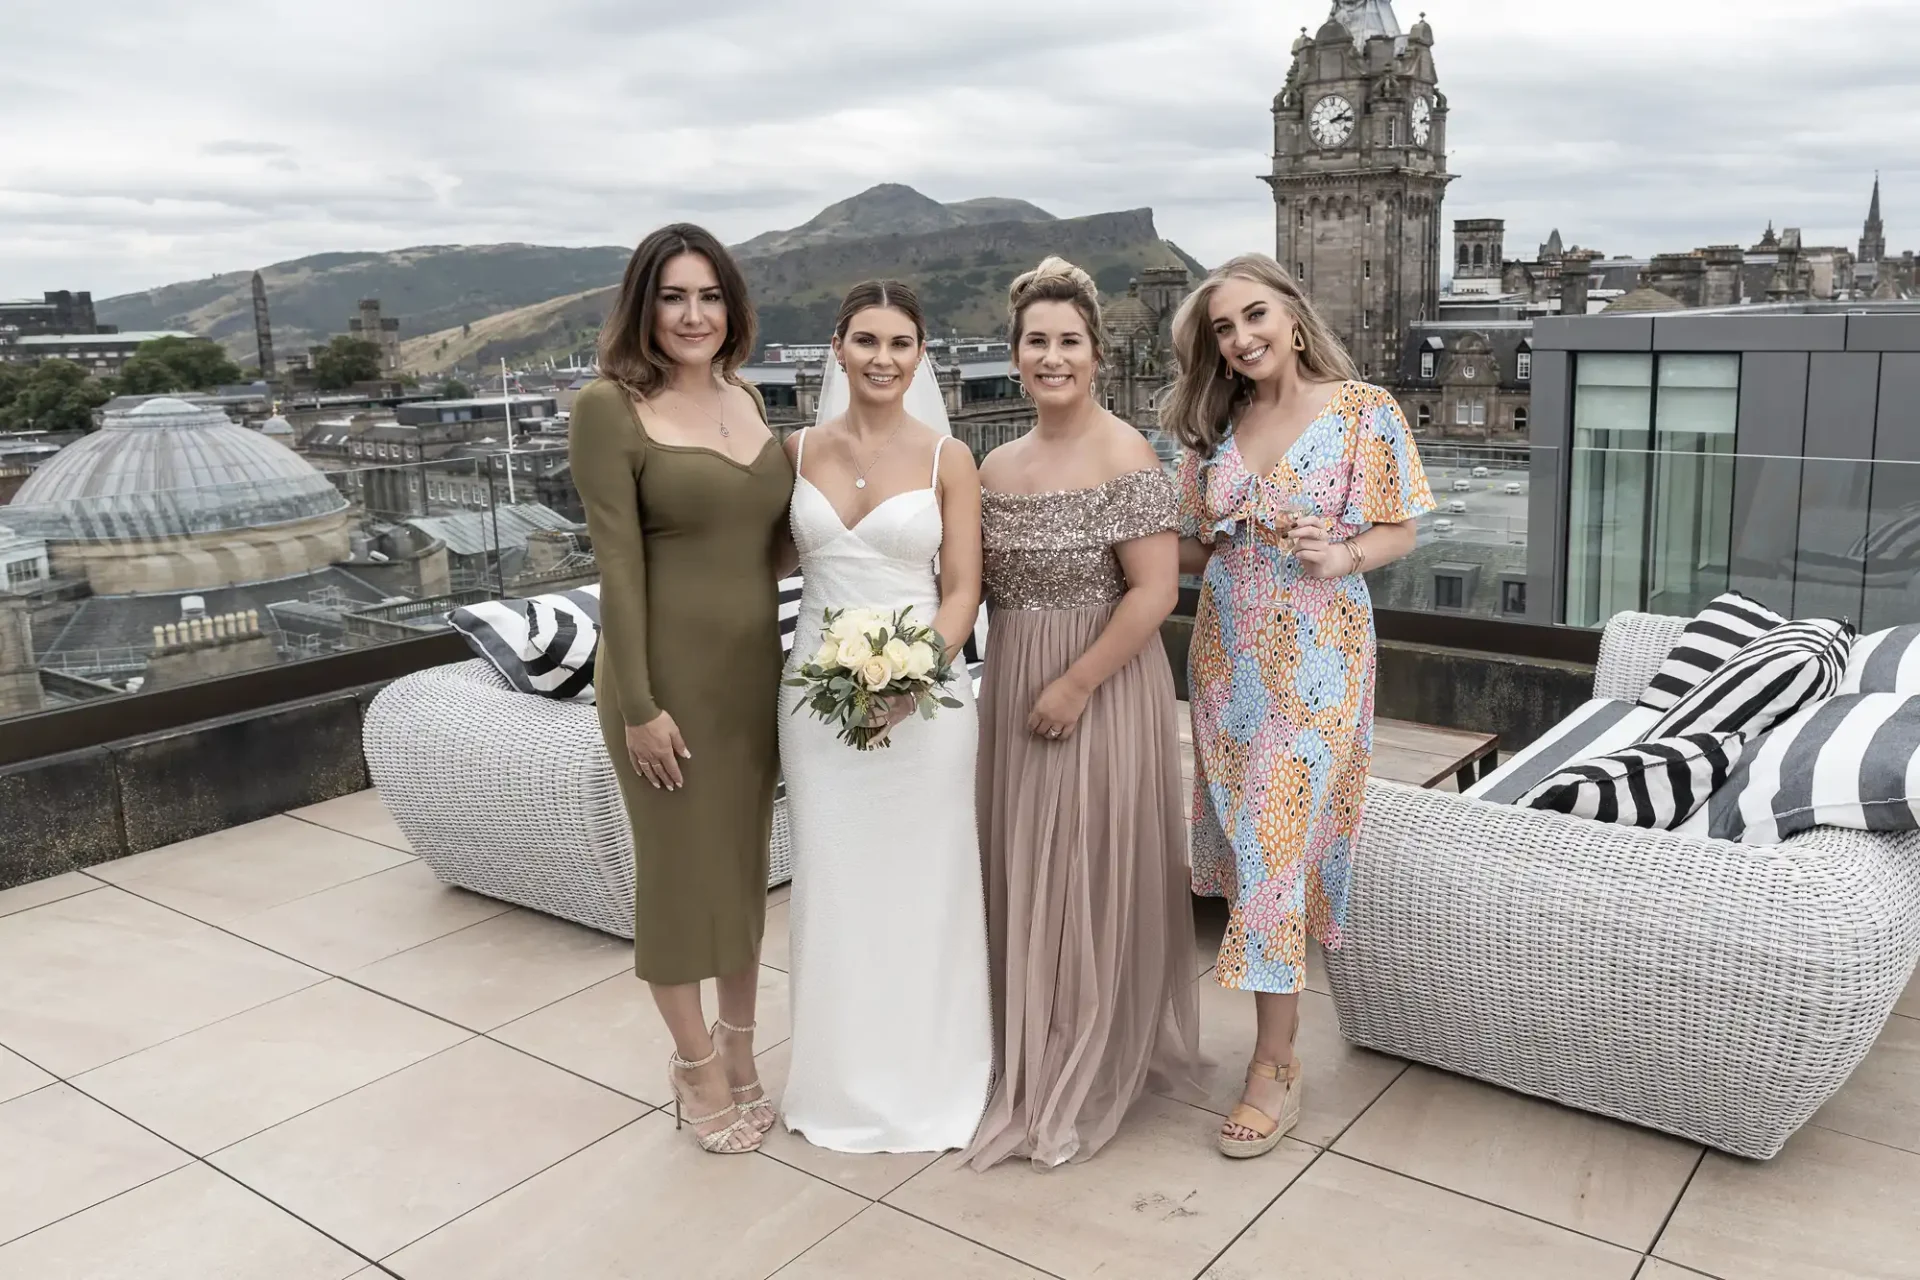 Four women in formal dresses posing together on a rooftop with a cityscape background.